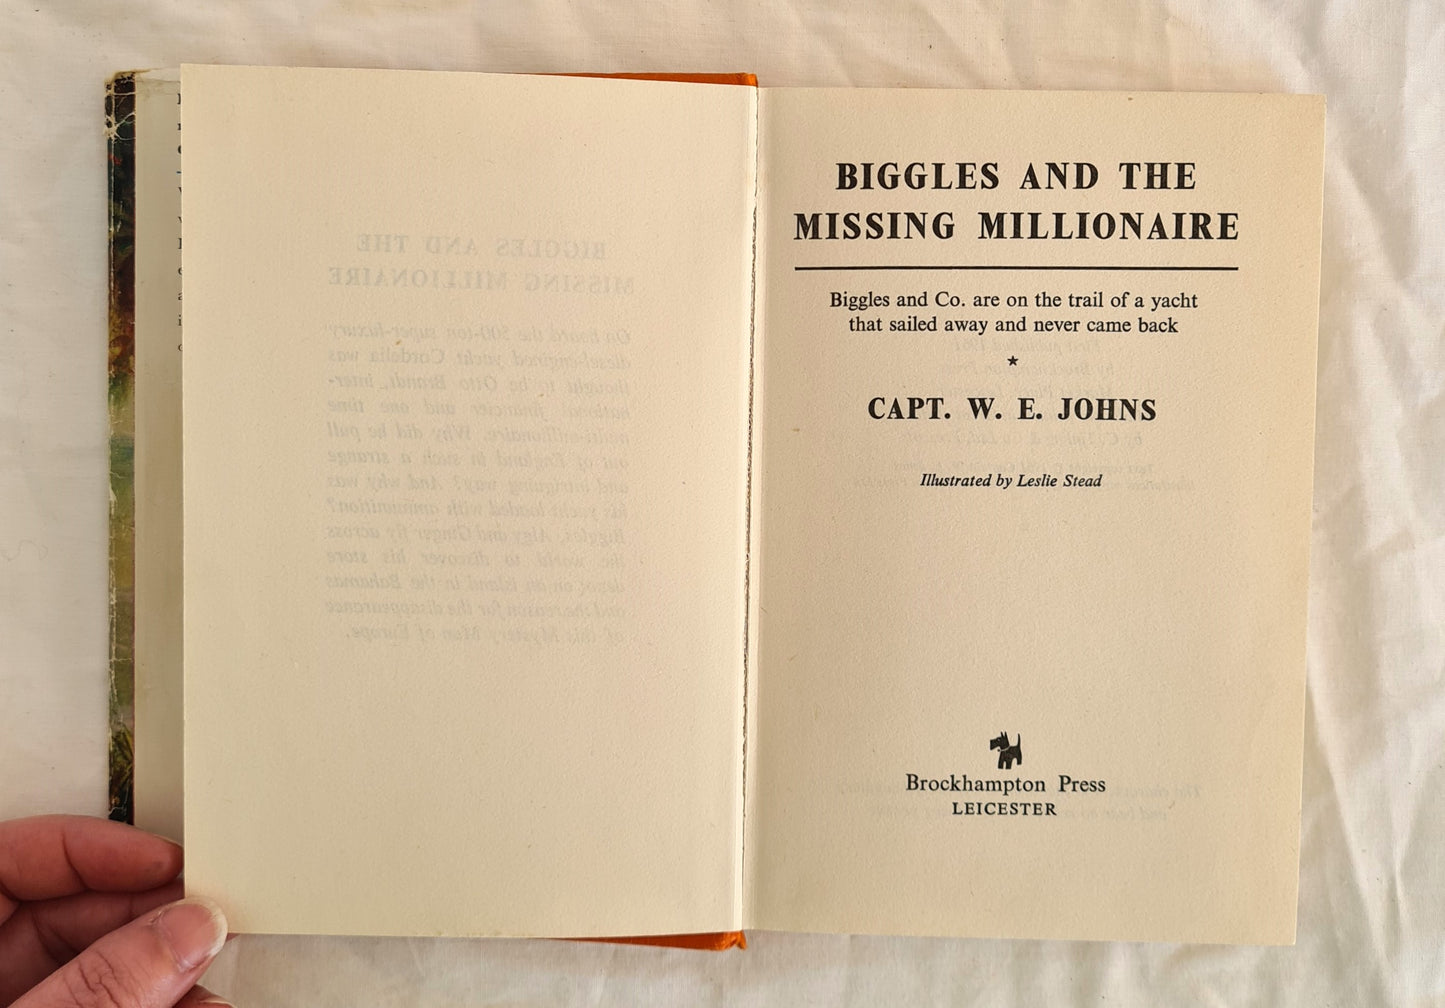 Biggles and the Missing Millionaire by Captain W. E. Johns